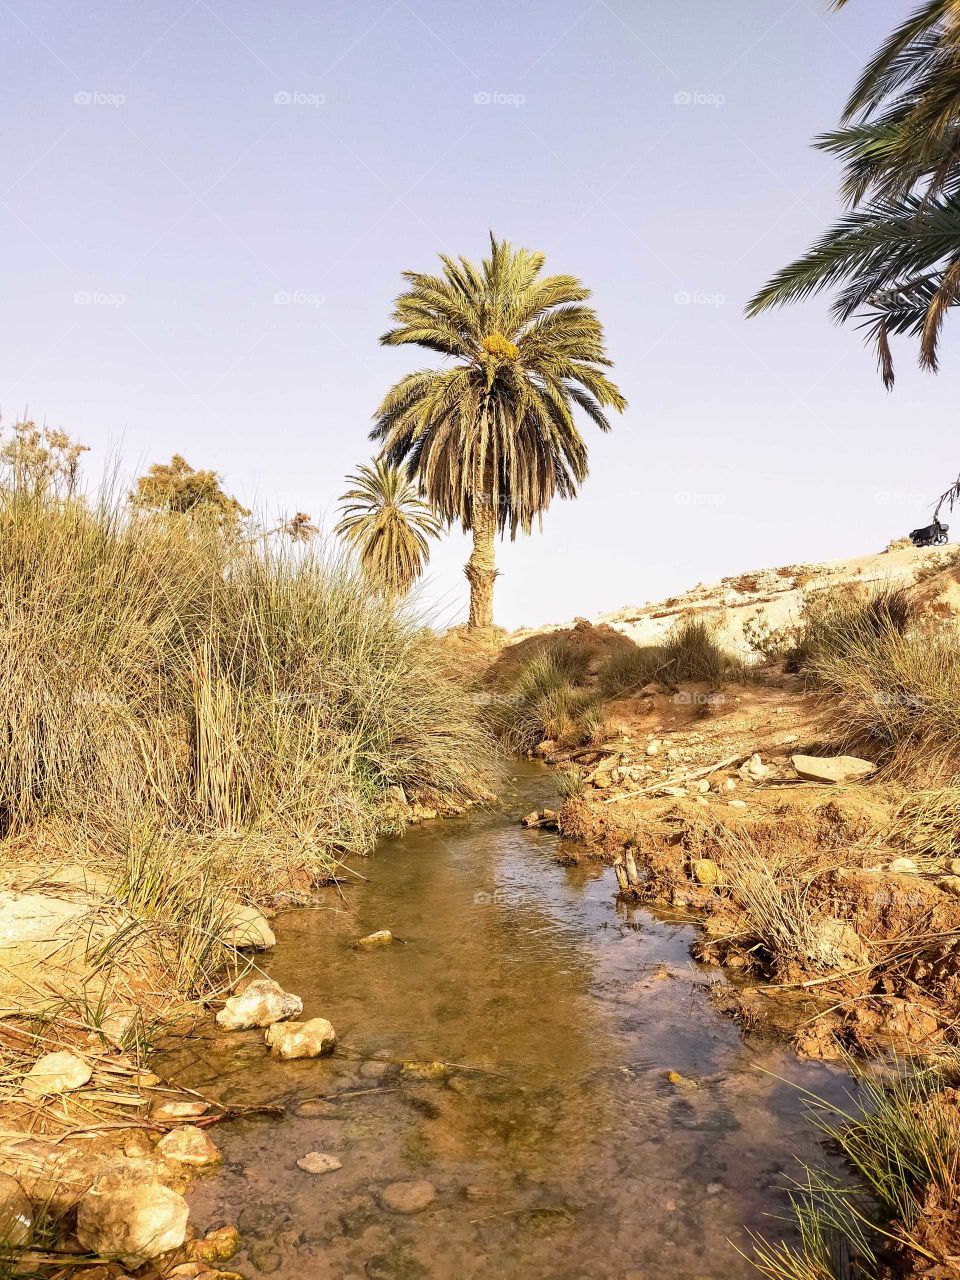 A palm tree in Wargnoun river in the South of Tighmert, Goulimine, Morocco